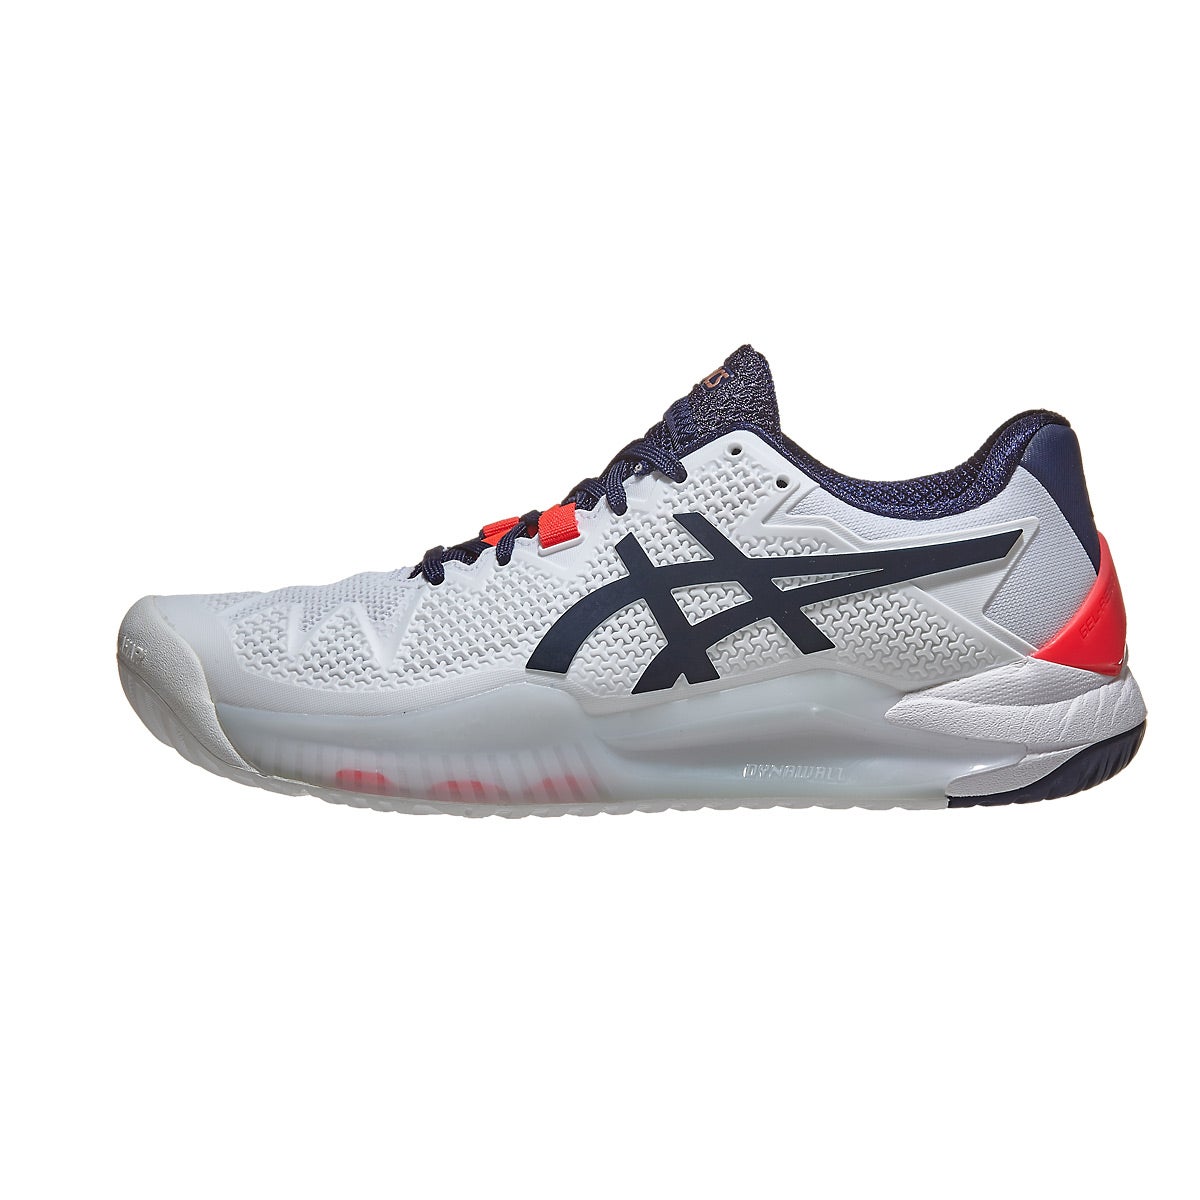 Asics Gel Resolution 8 White/Navy Women's Shoes 360° View